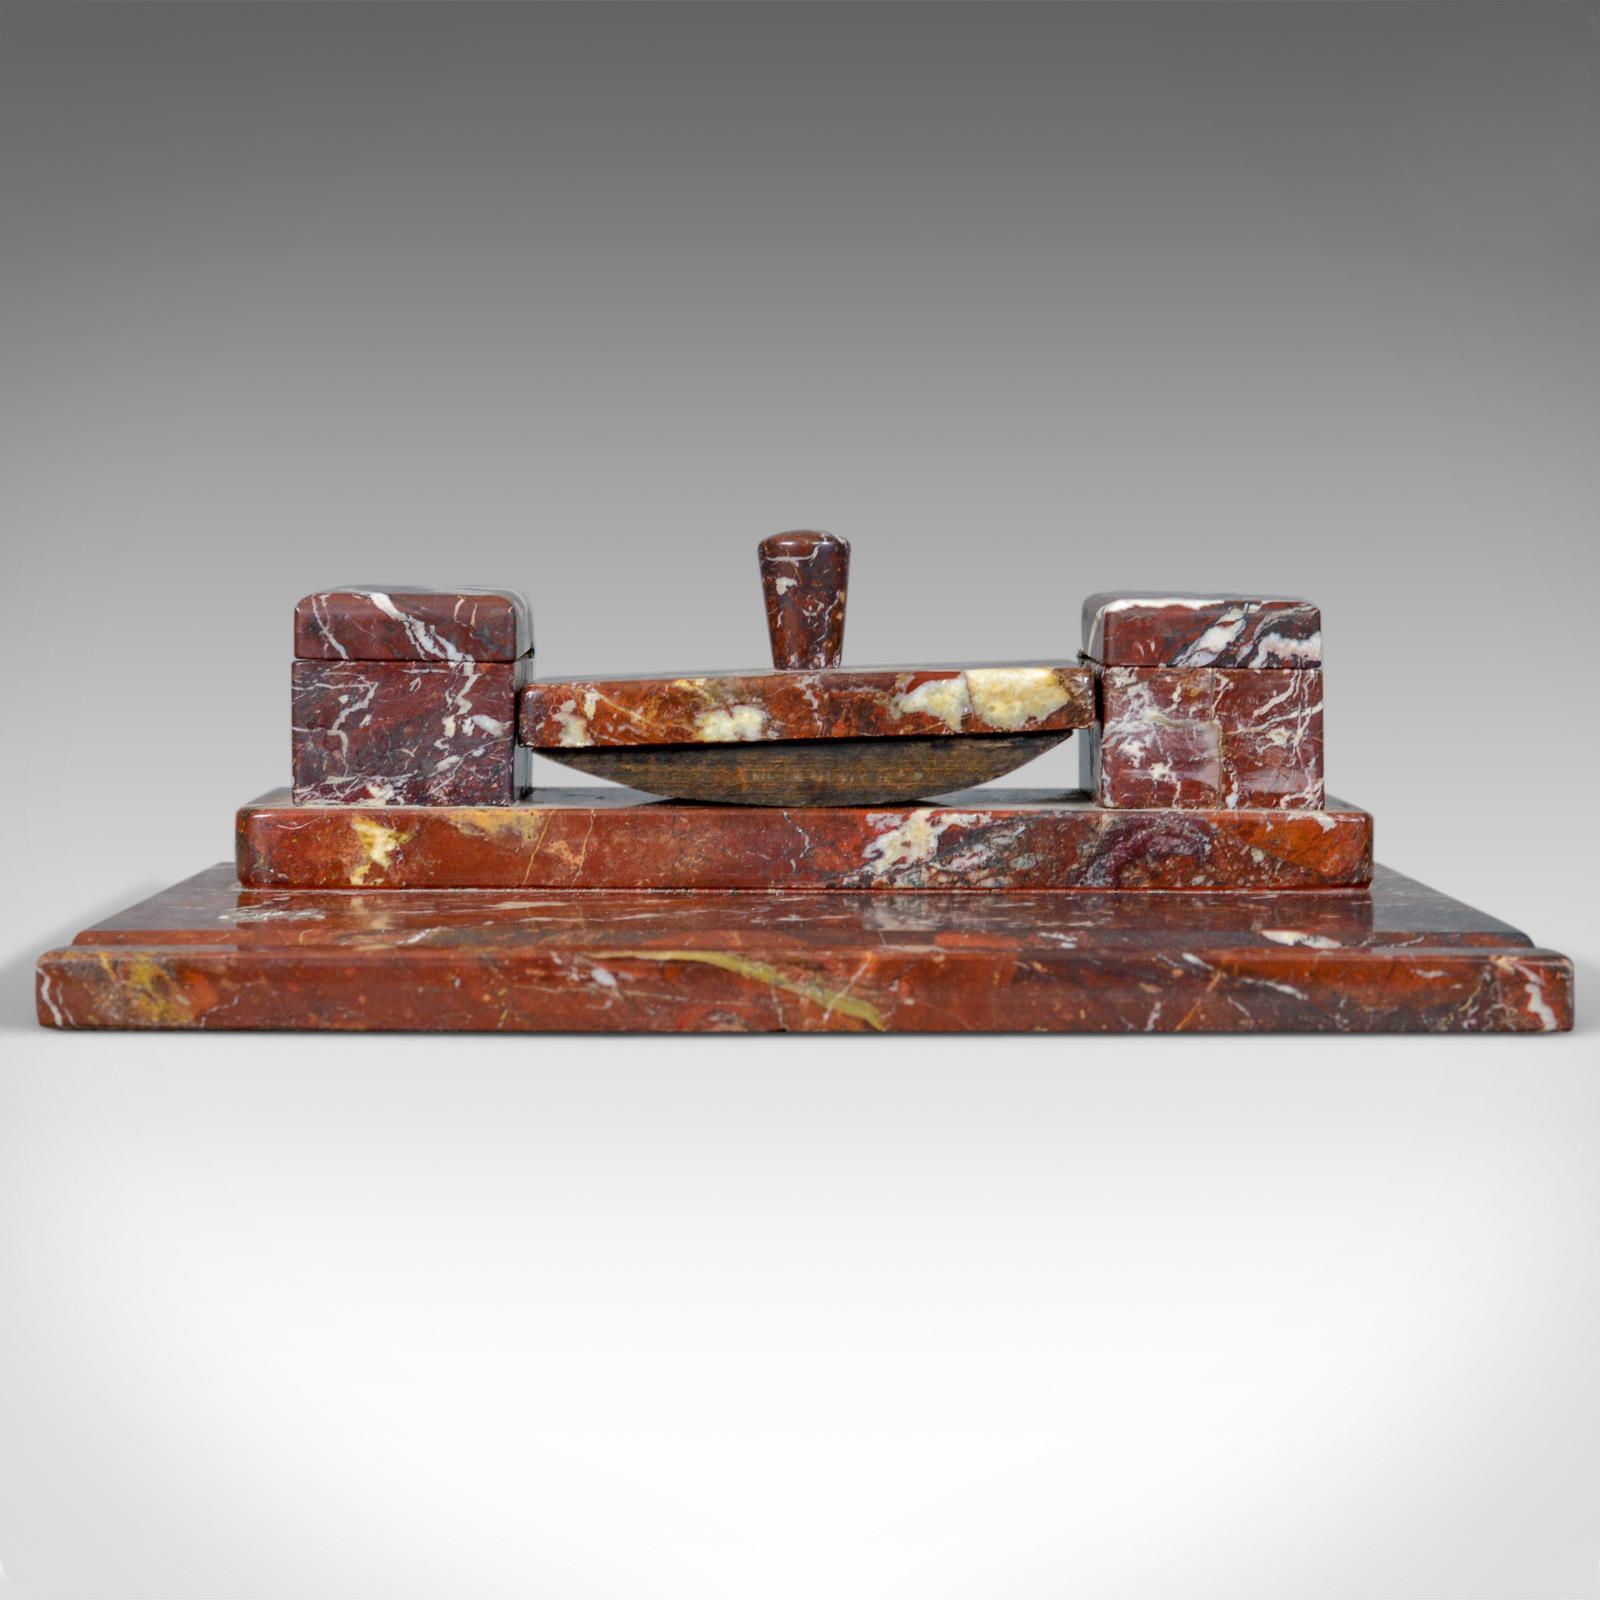 This is a French antique Art Deco marble desk stand. A large, heavy inkwell, pen rest and blotter dating to early 20th century, circa 1930.

A quality Art Deco desk stand in fine order
In attractively veined rouge marble
The platform with pen